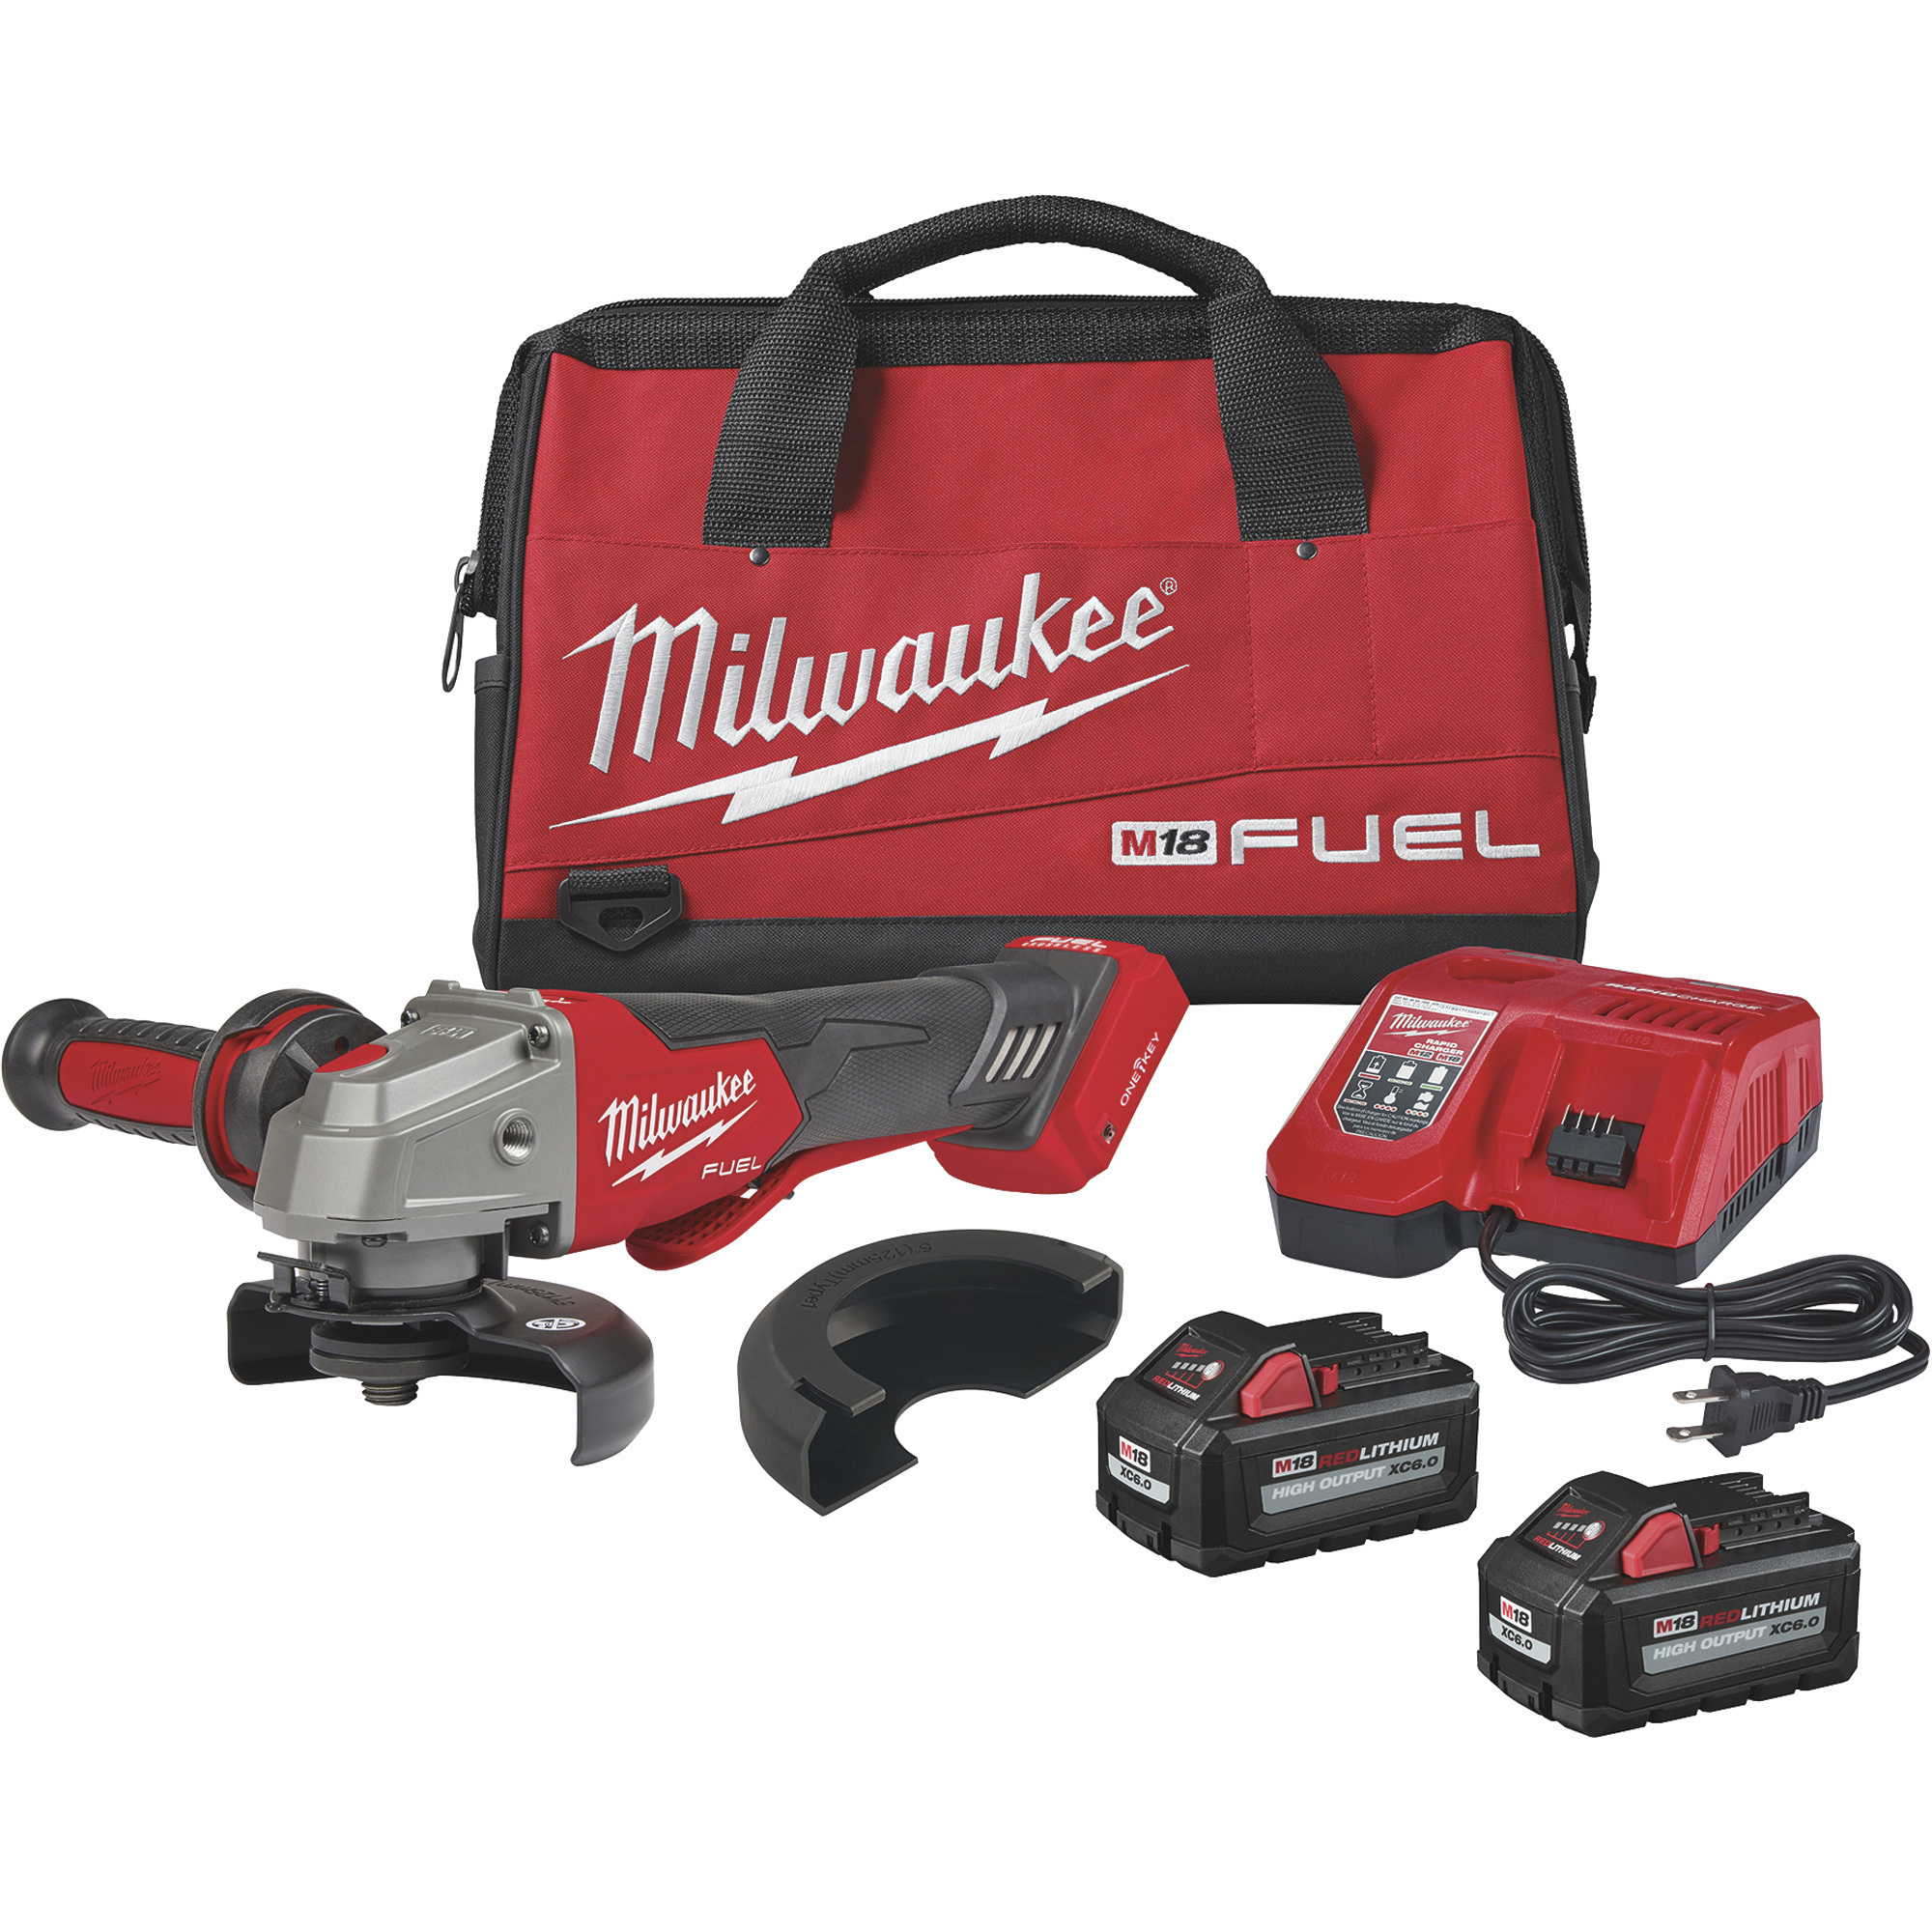 Milwaukee M18 FUEL 4-1/2Inch/5Inch Braking Grinder with One-Key Paddle Switch, No Lock, 2 Batteries, Model 2882-22